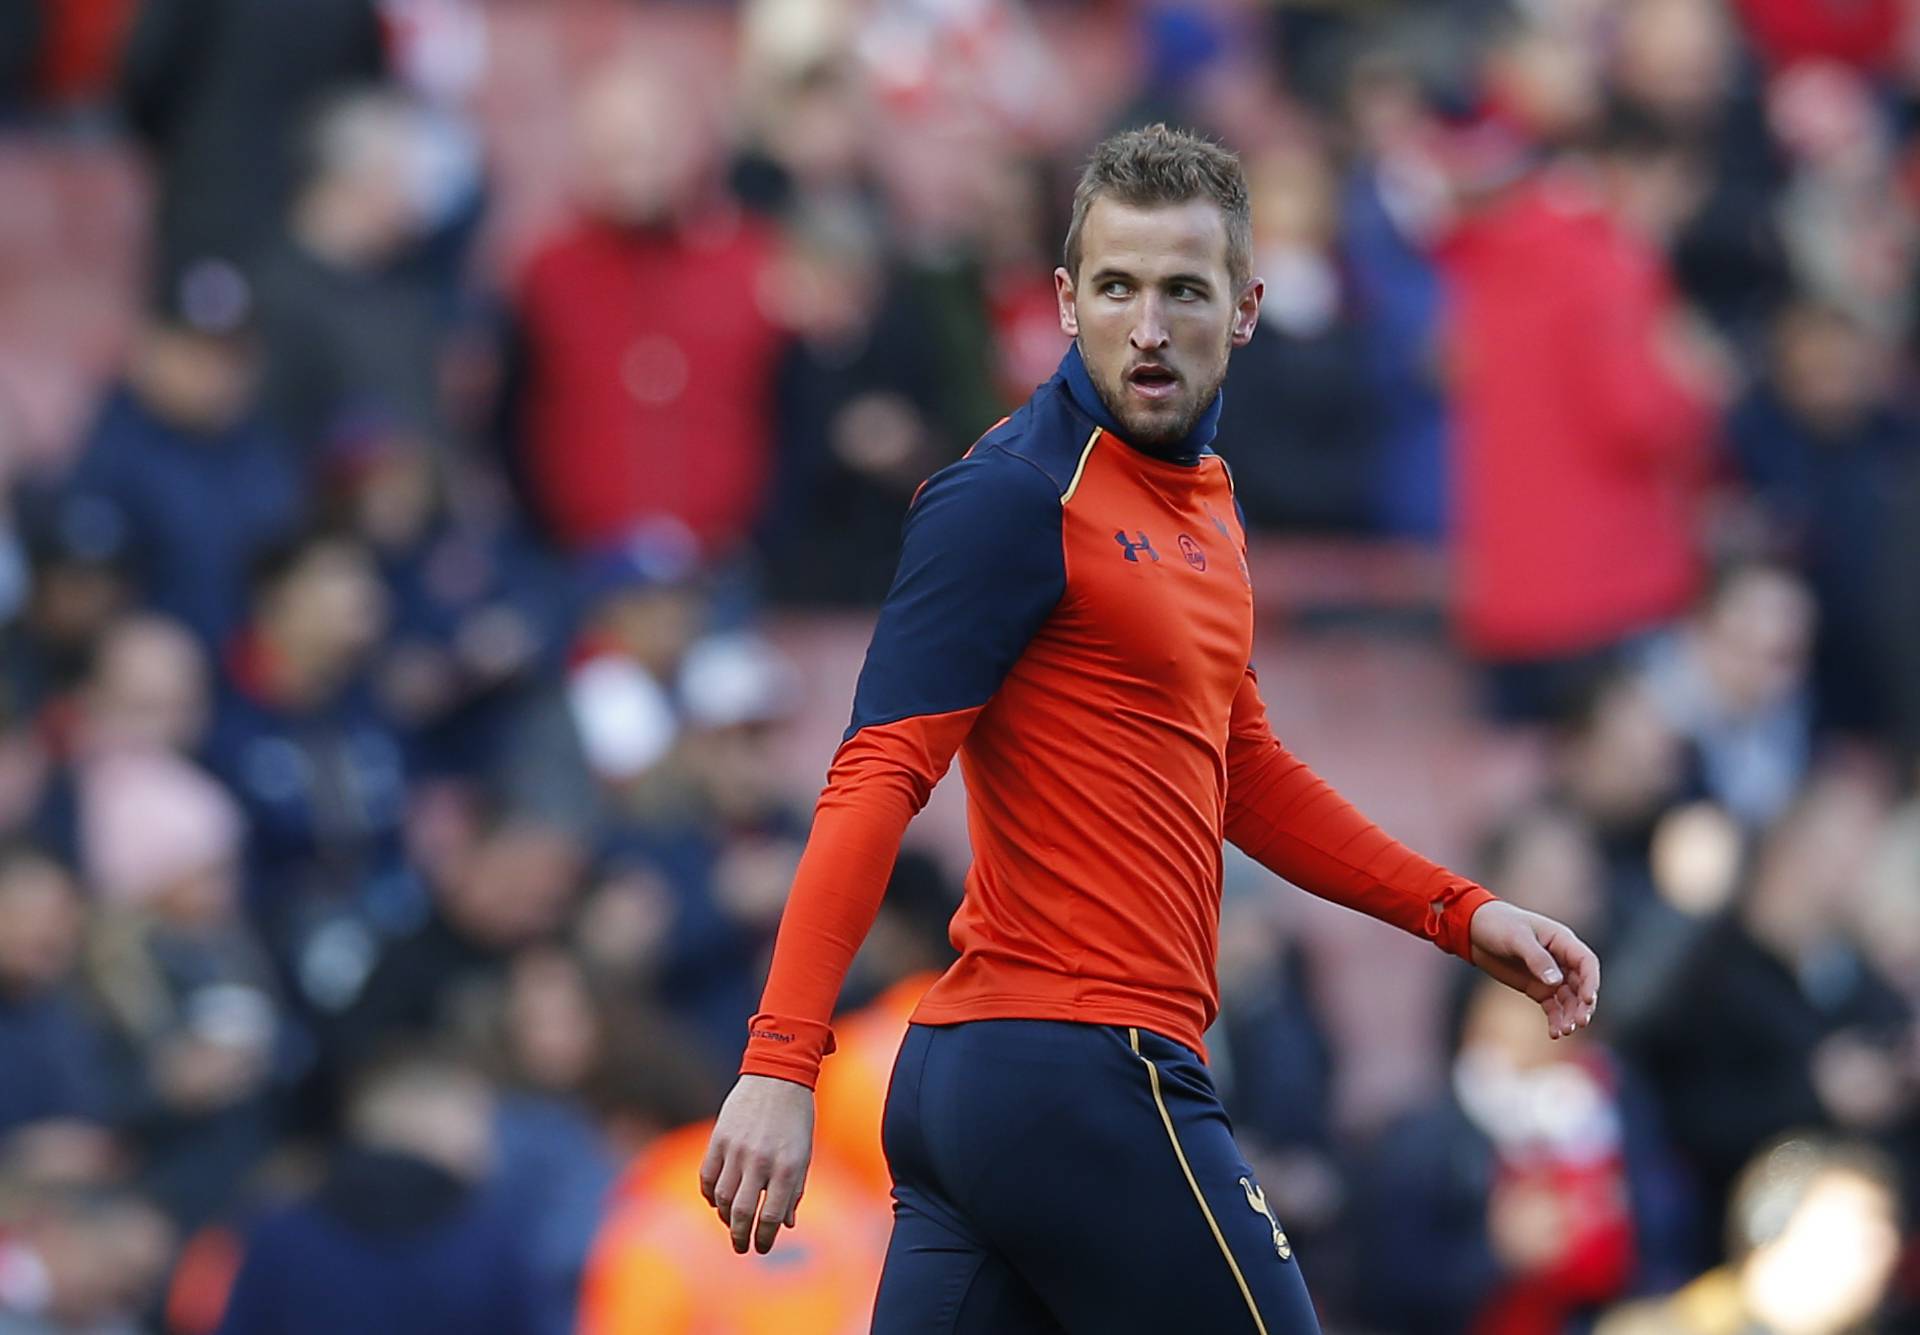 Tottenham's Harry Kane warms up before the match